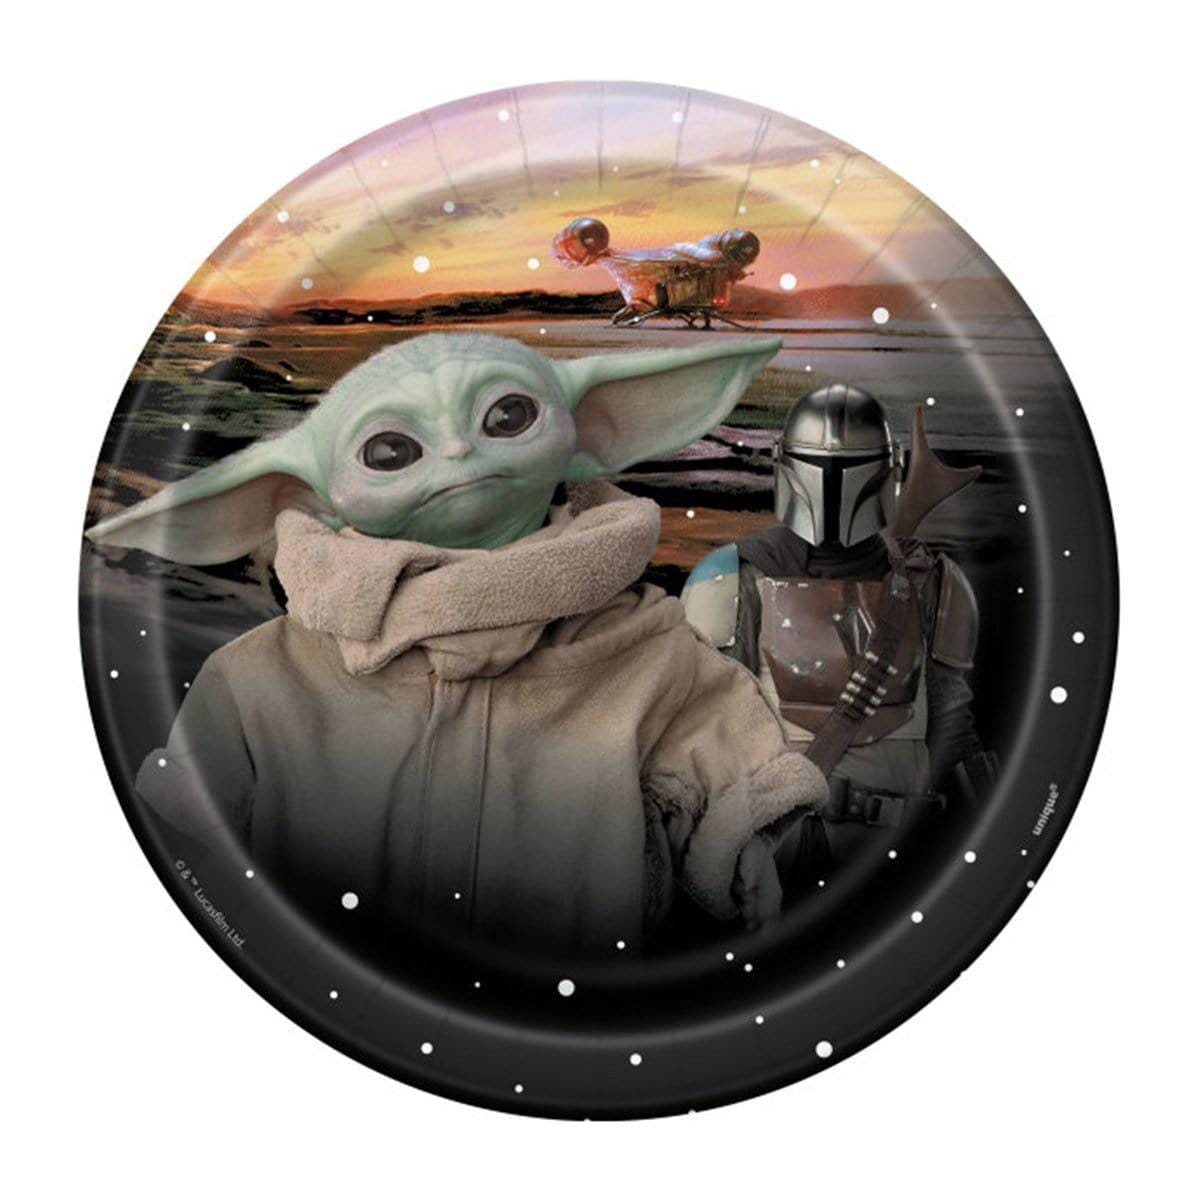 Buy Kids Birthday Baby Yoda Dessert plates 7 inches, 8 per package sold at Party Expert